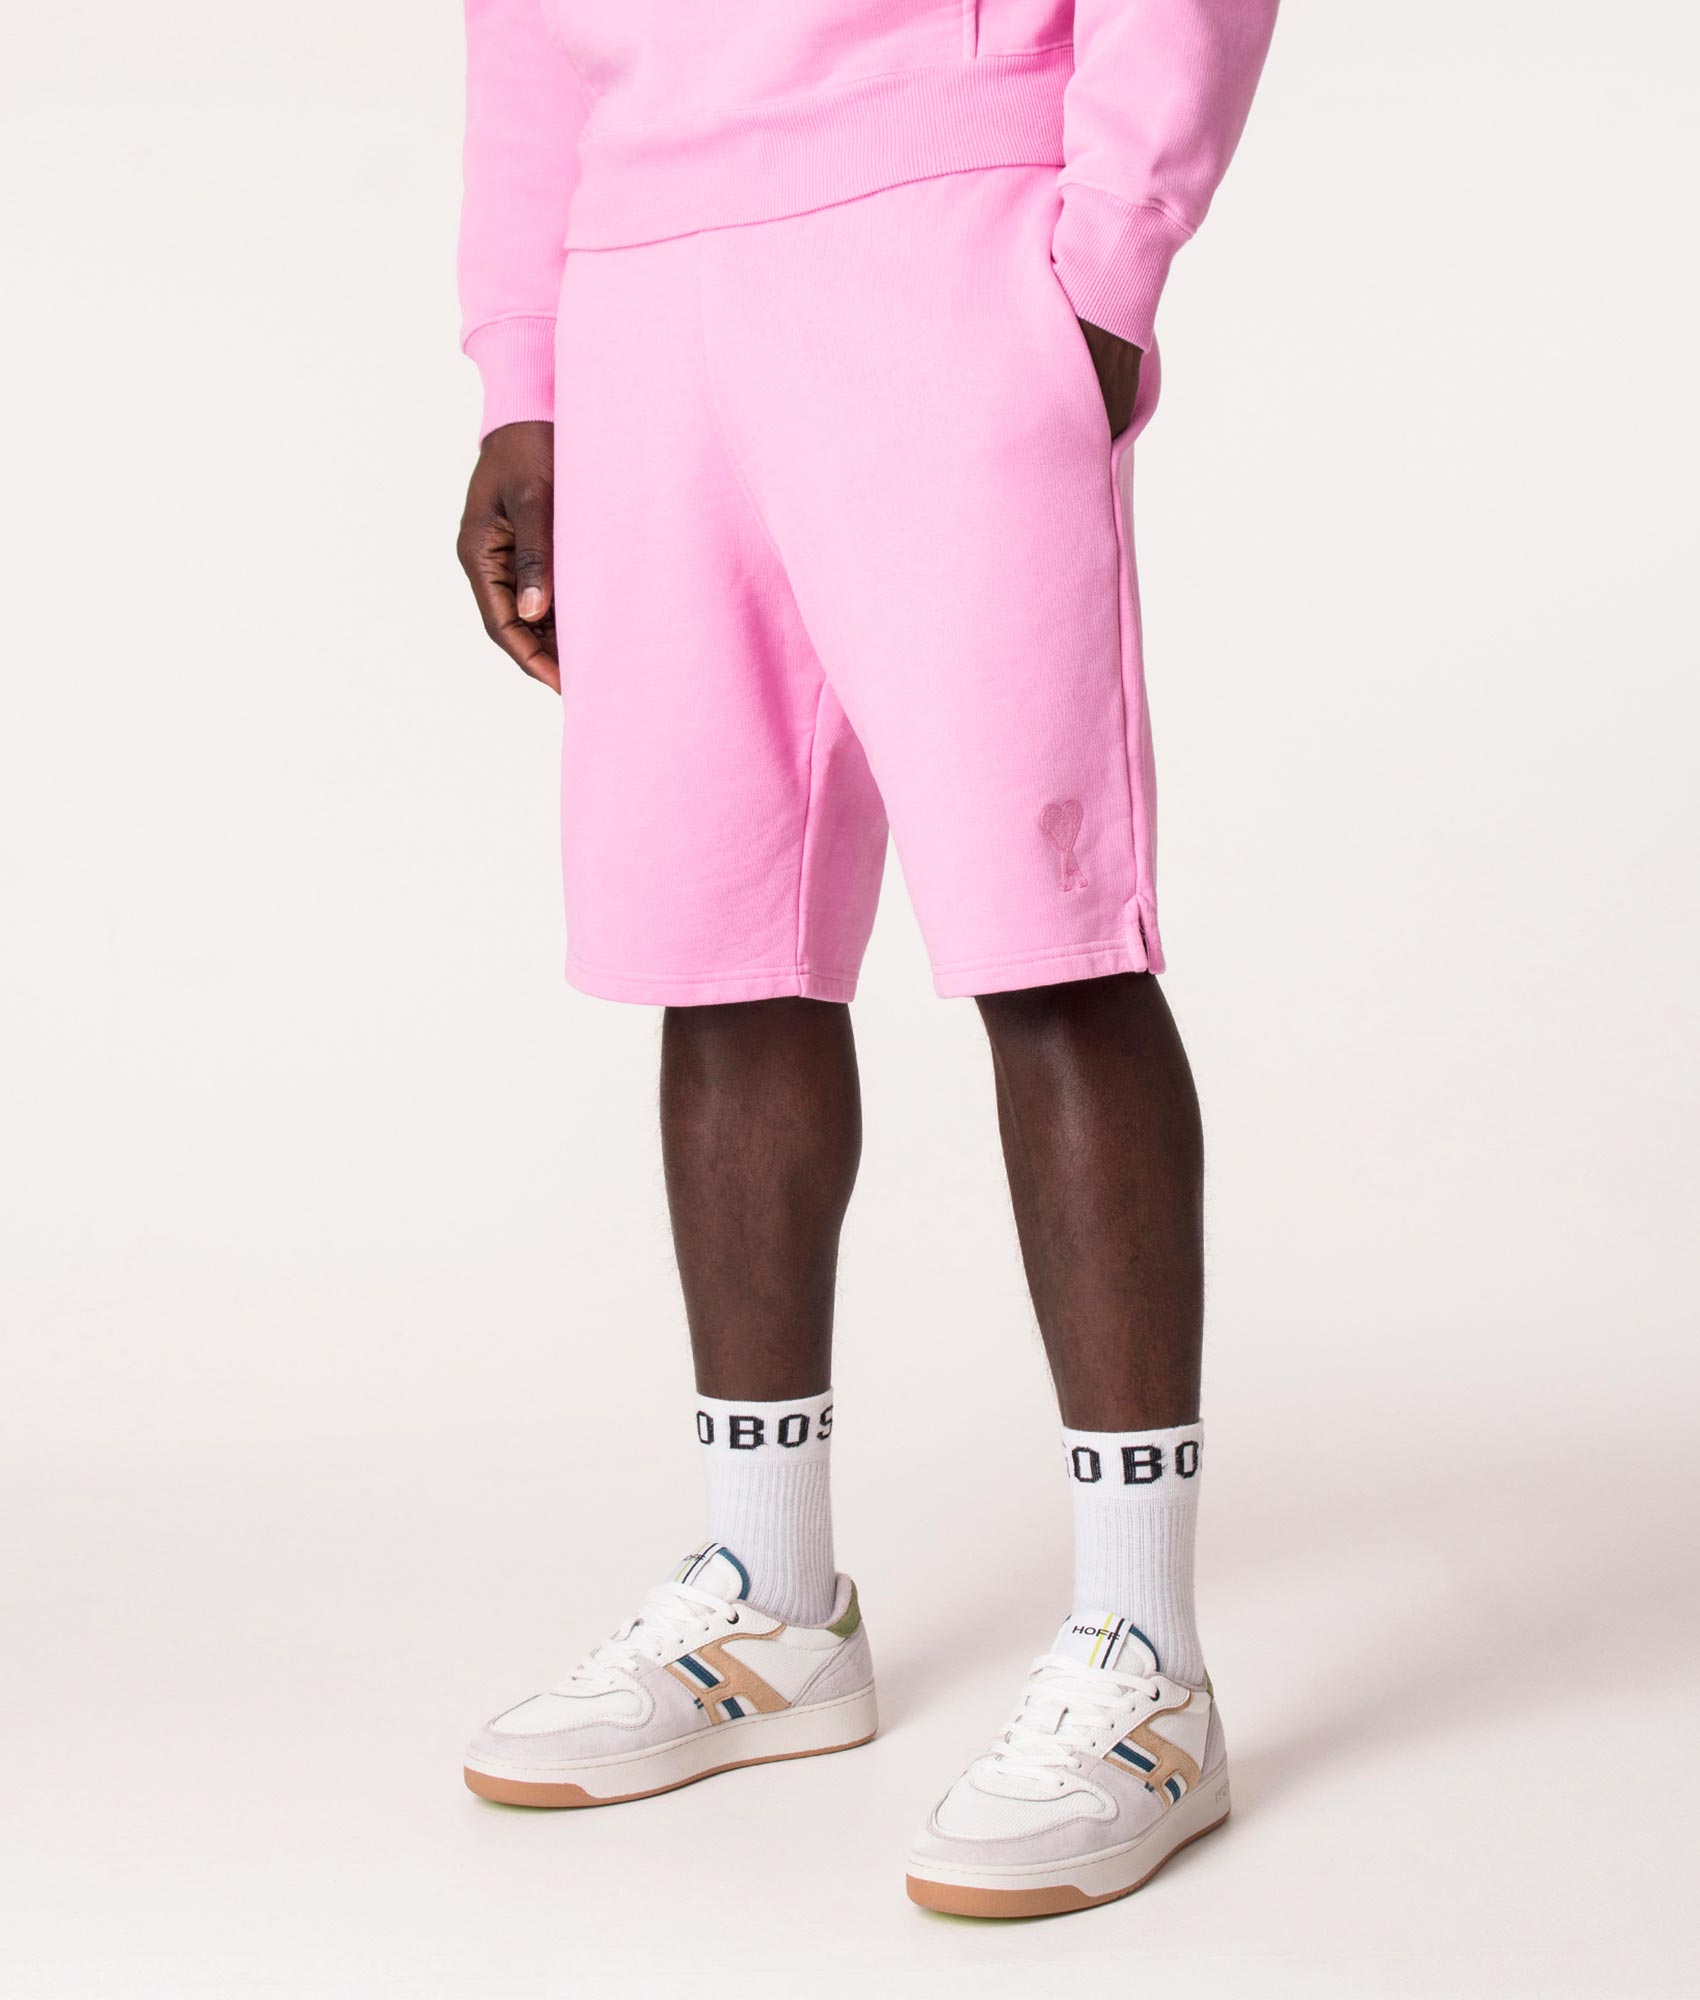 AMI Mens Regular Fit Tonal ADC Sweat Shorts - Colour: 663 Candy Pink/Candy Pink - Size: Small